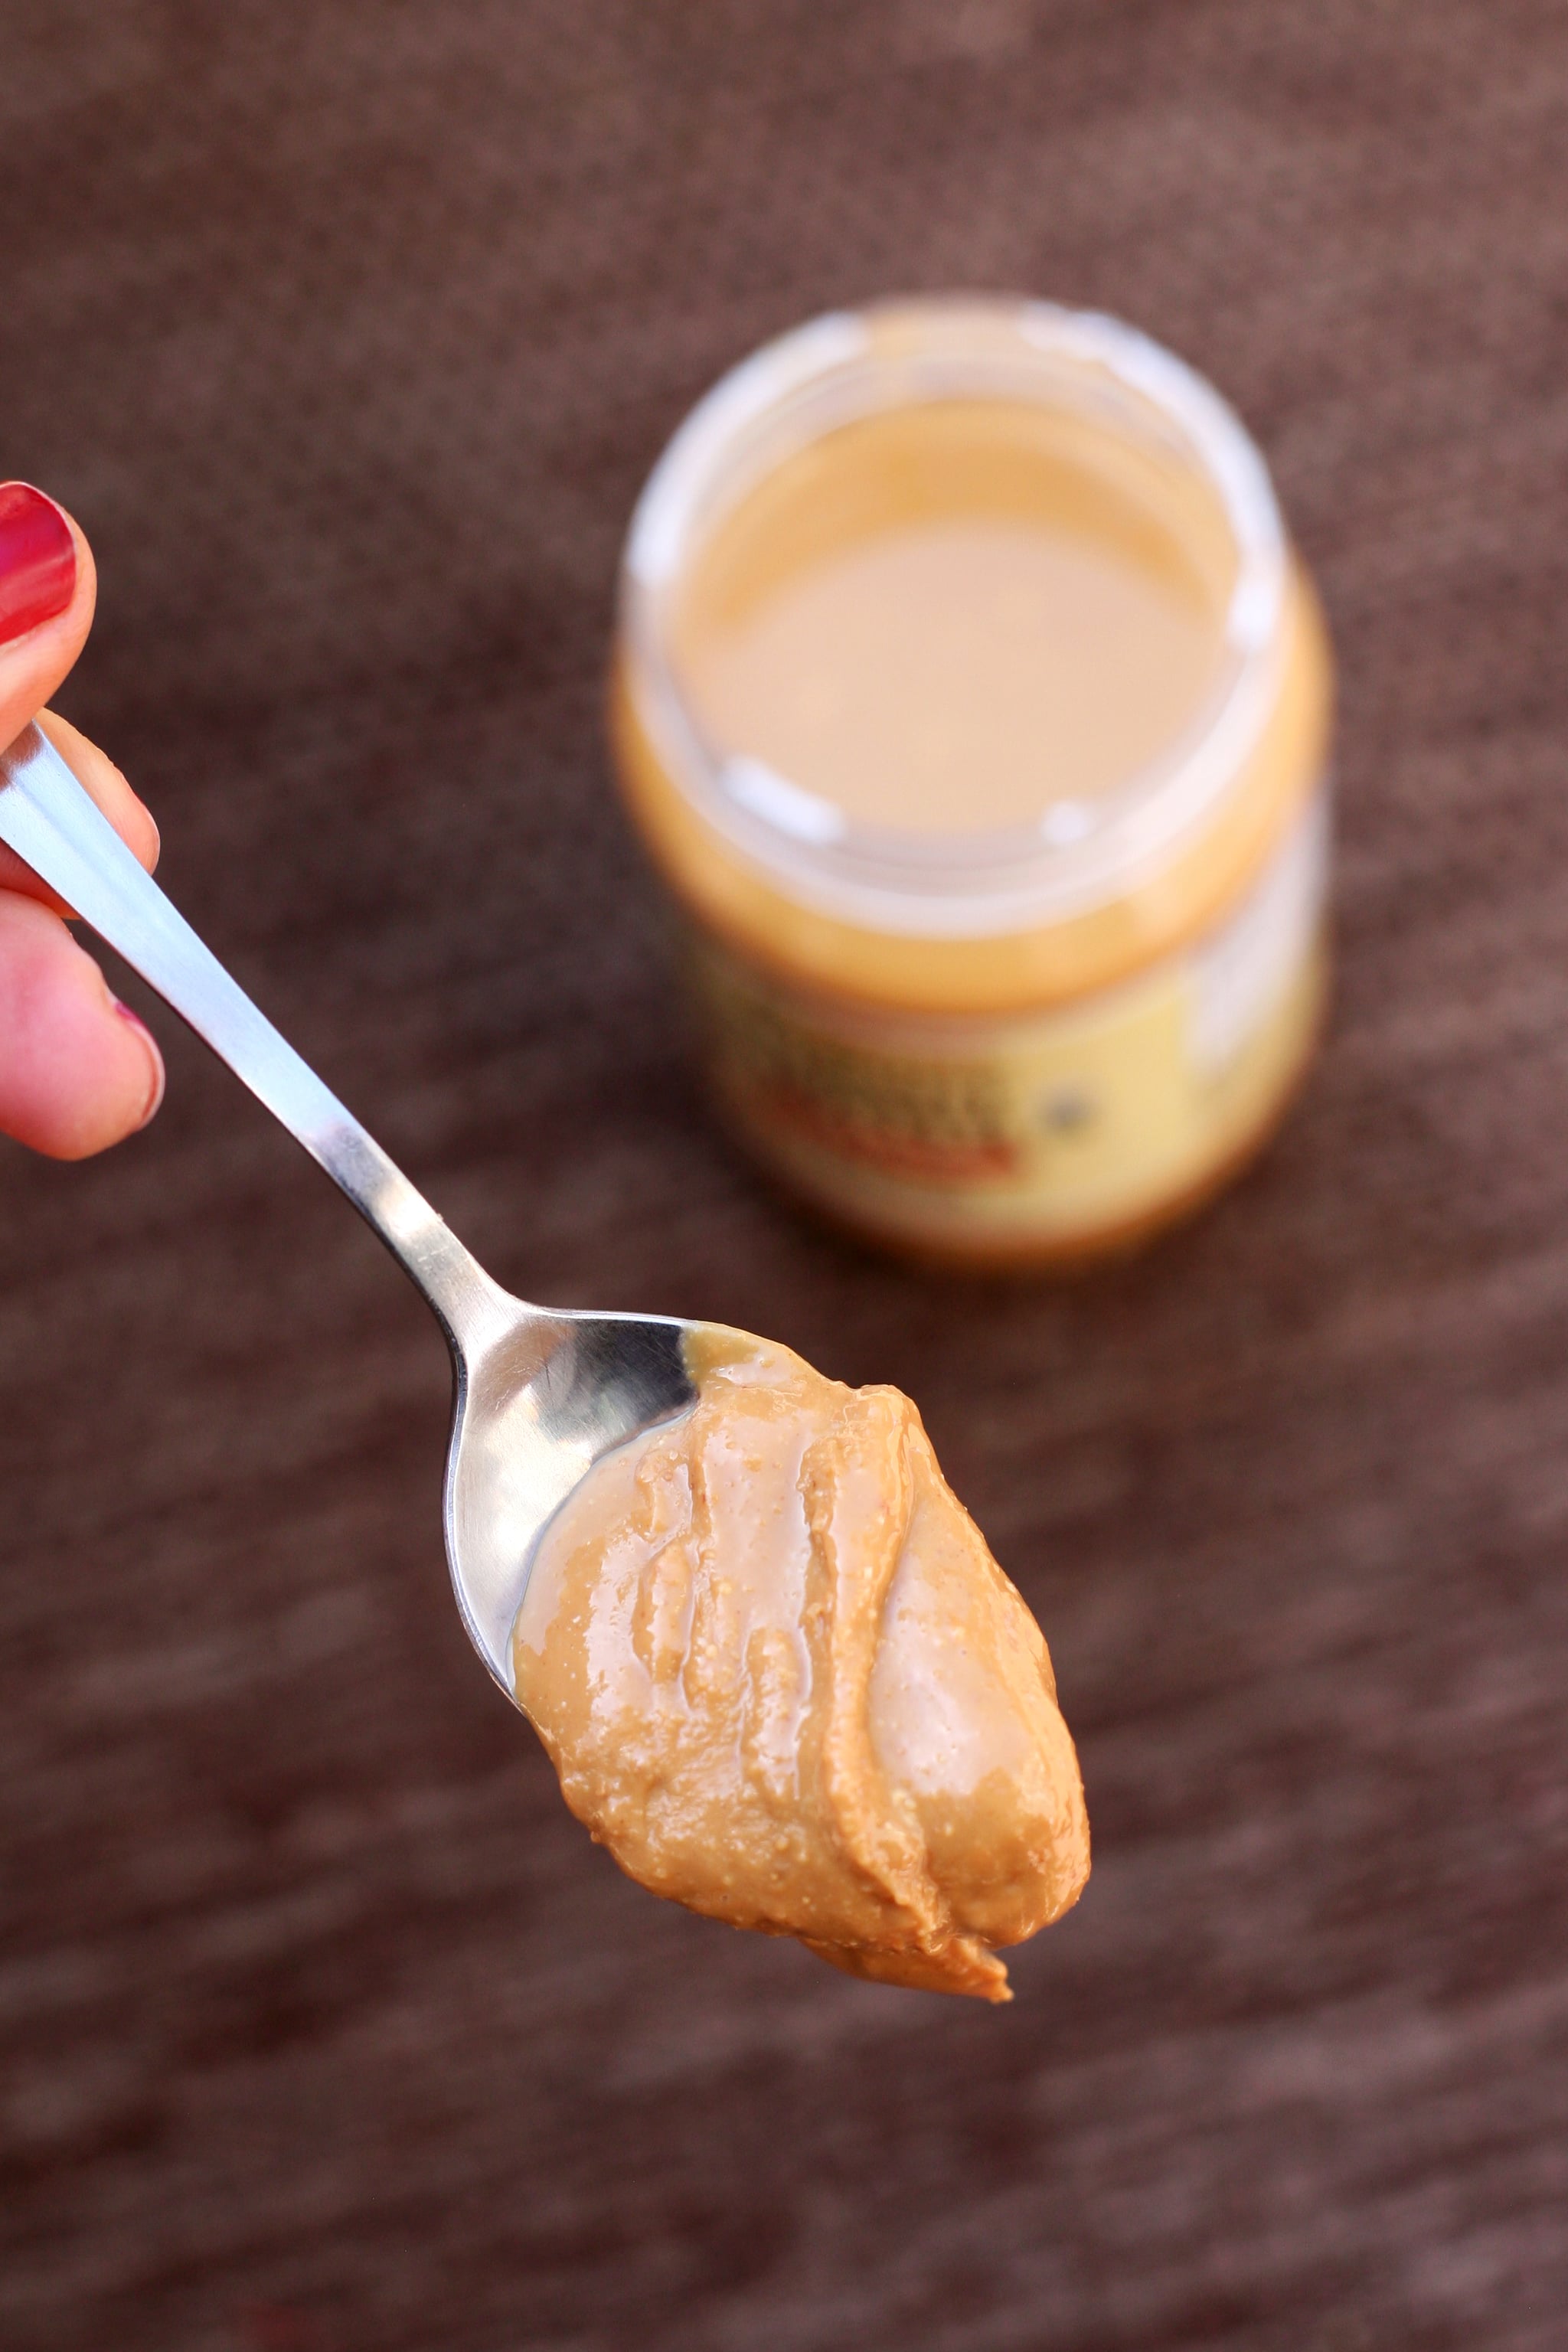 Peanut Butter Weight Loss: ​How Much Peanut Butter Can You Eat And